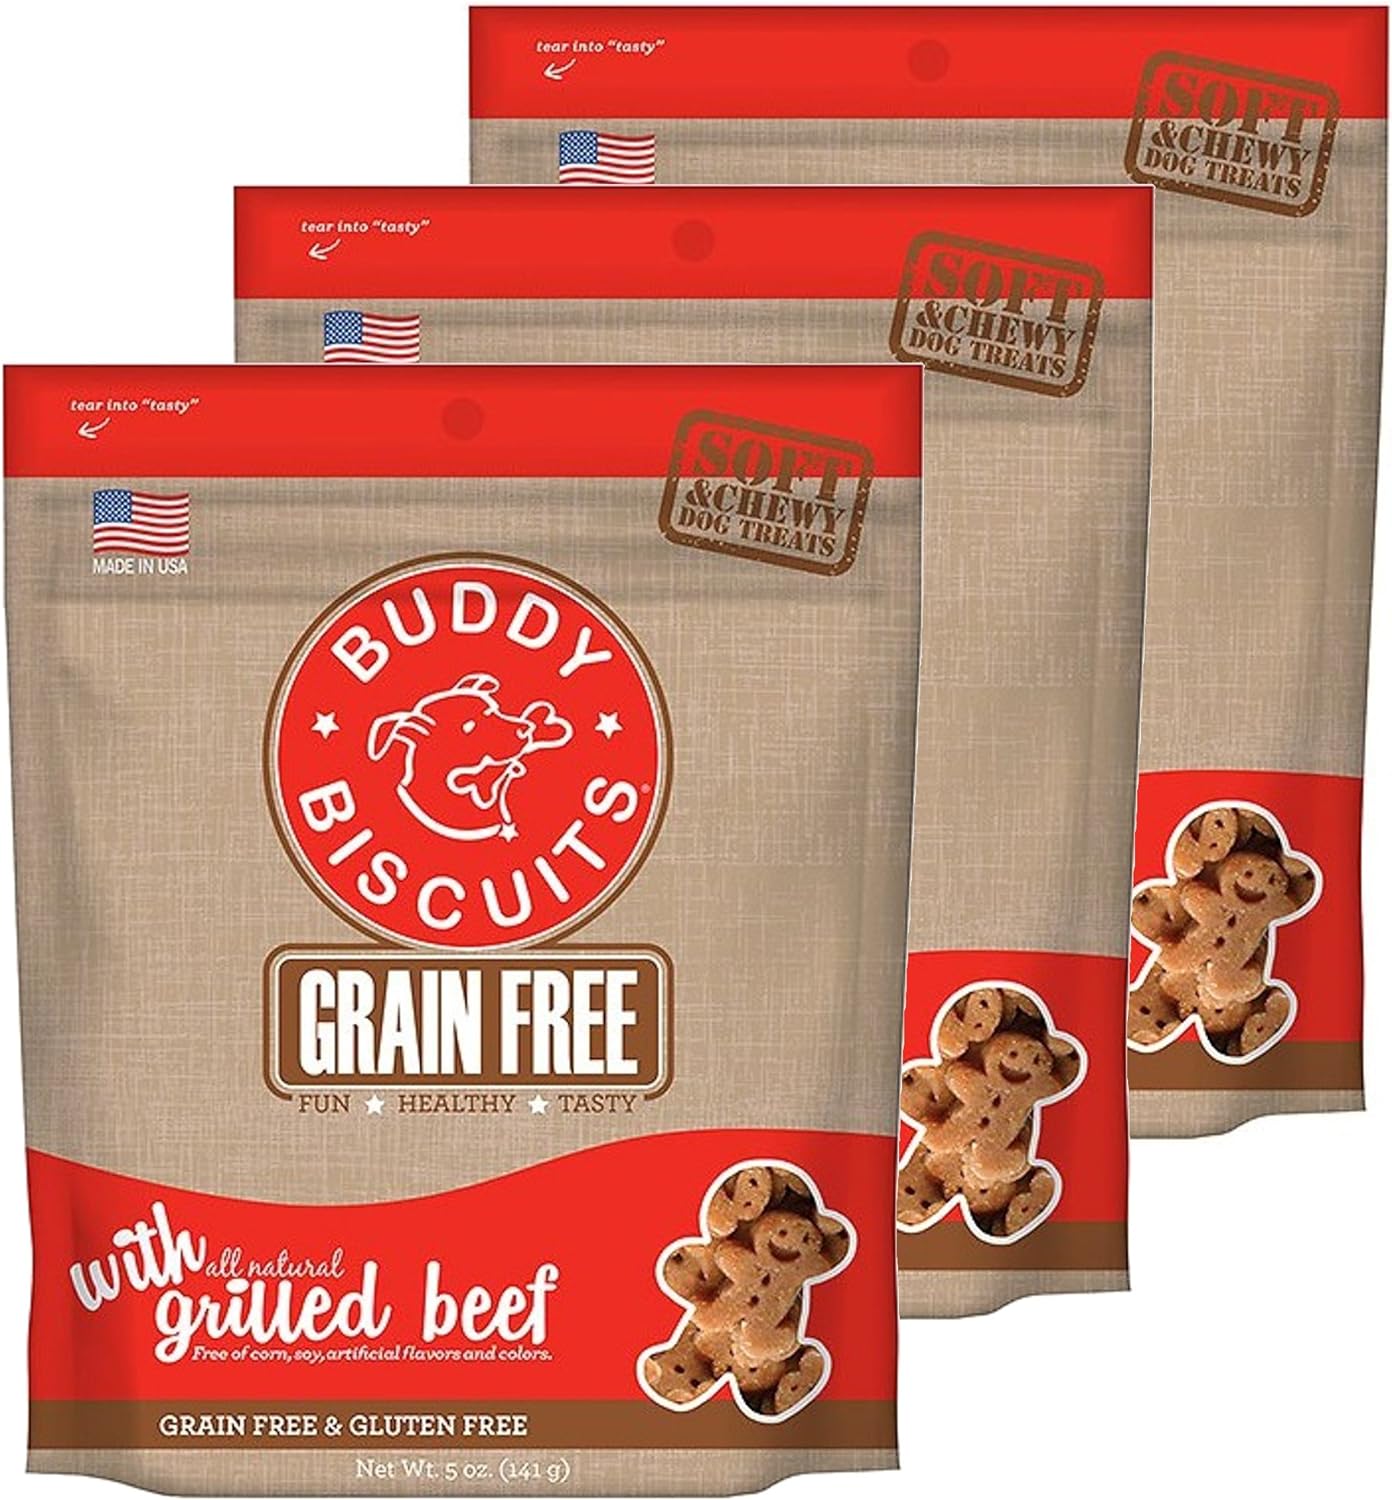 Buddy Biscuits Grain Free Soft & Chewy Dog Treats with All Natural Grilled Beef (3 Pack) 5 oz Each